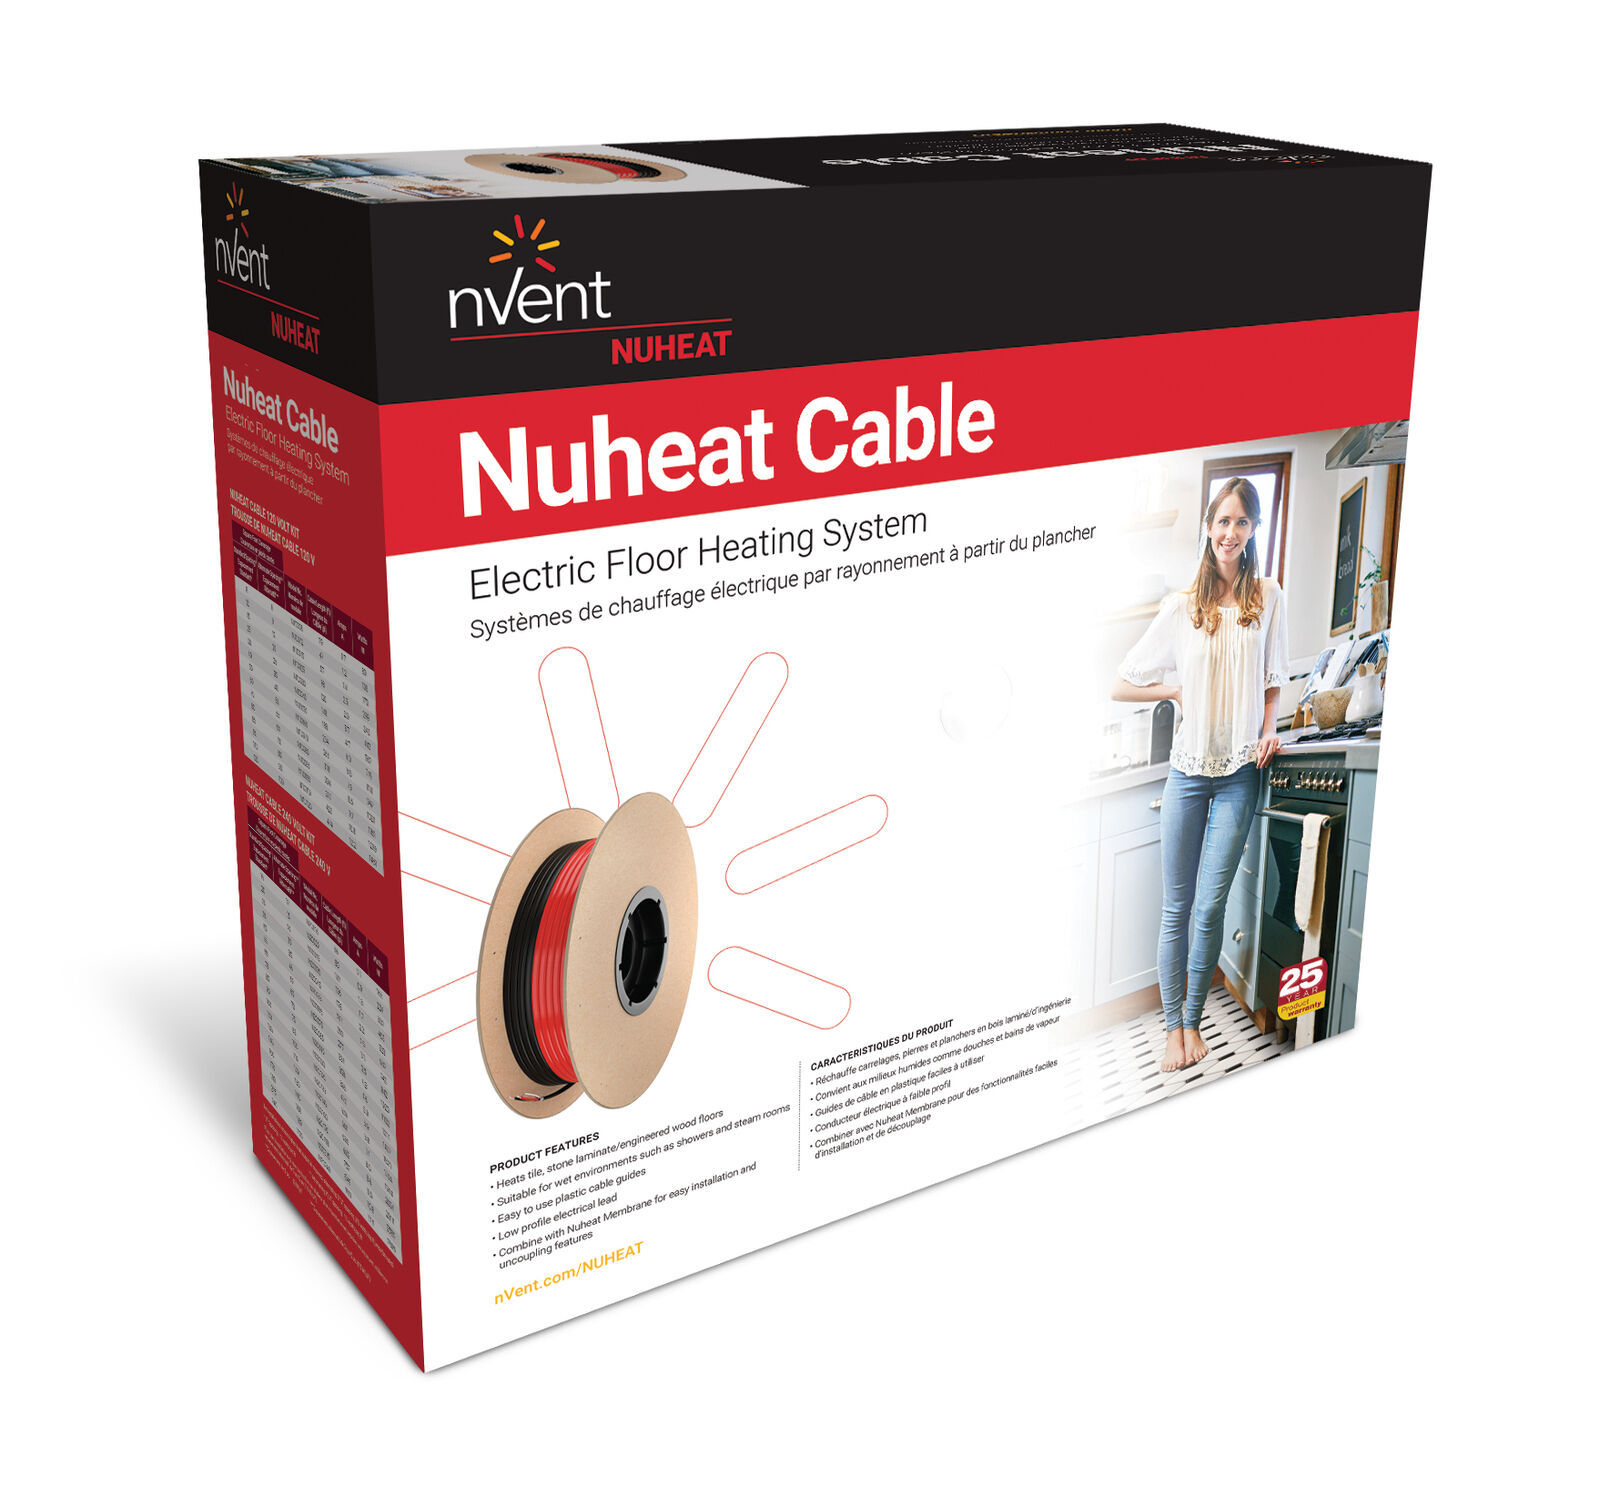 nVent Nuheat Electric Radiant Floor Heating Cable 120V/ 240V for Underfloor Heat - $179.00 - $888.00